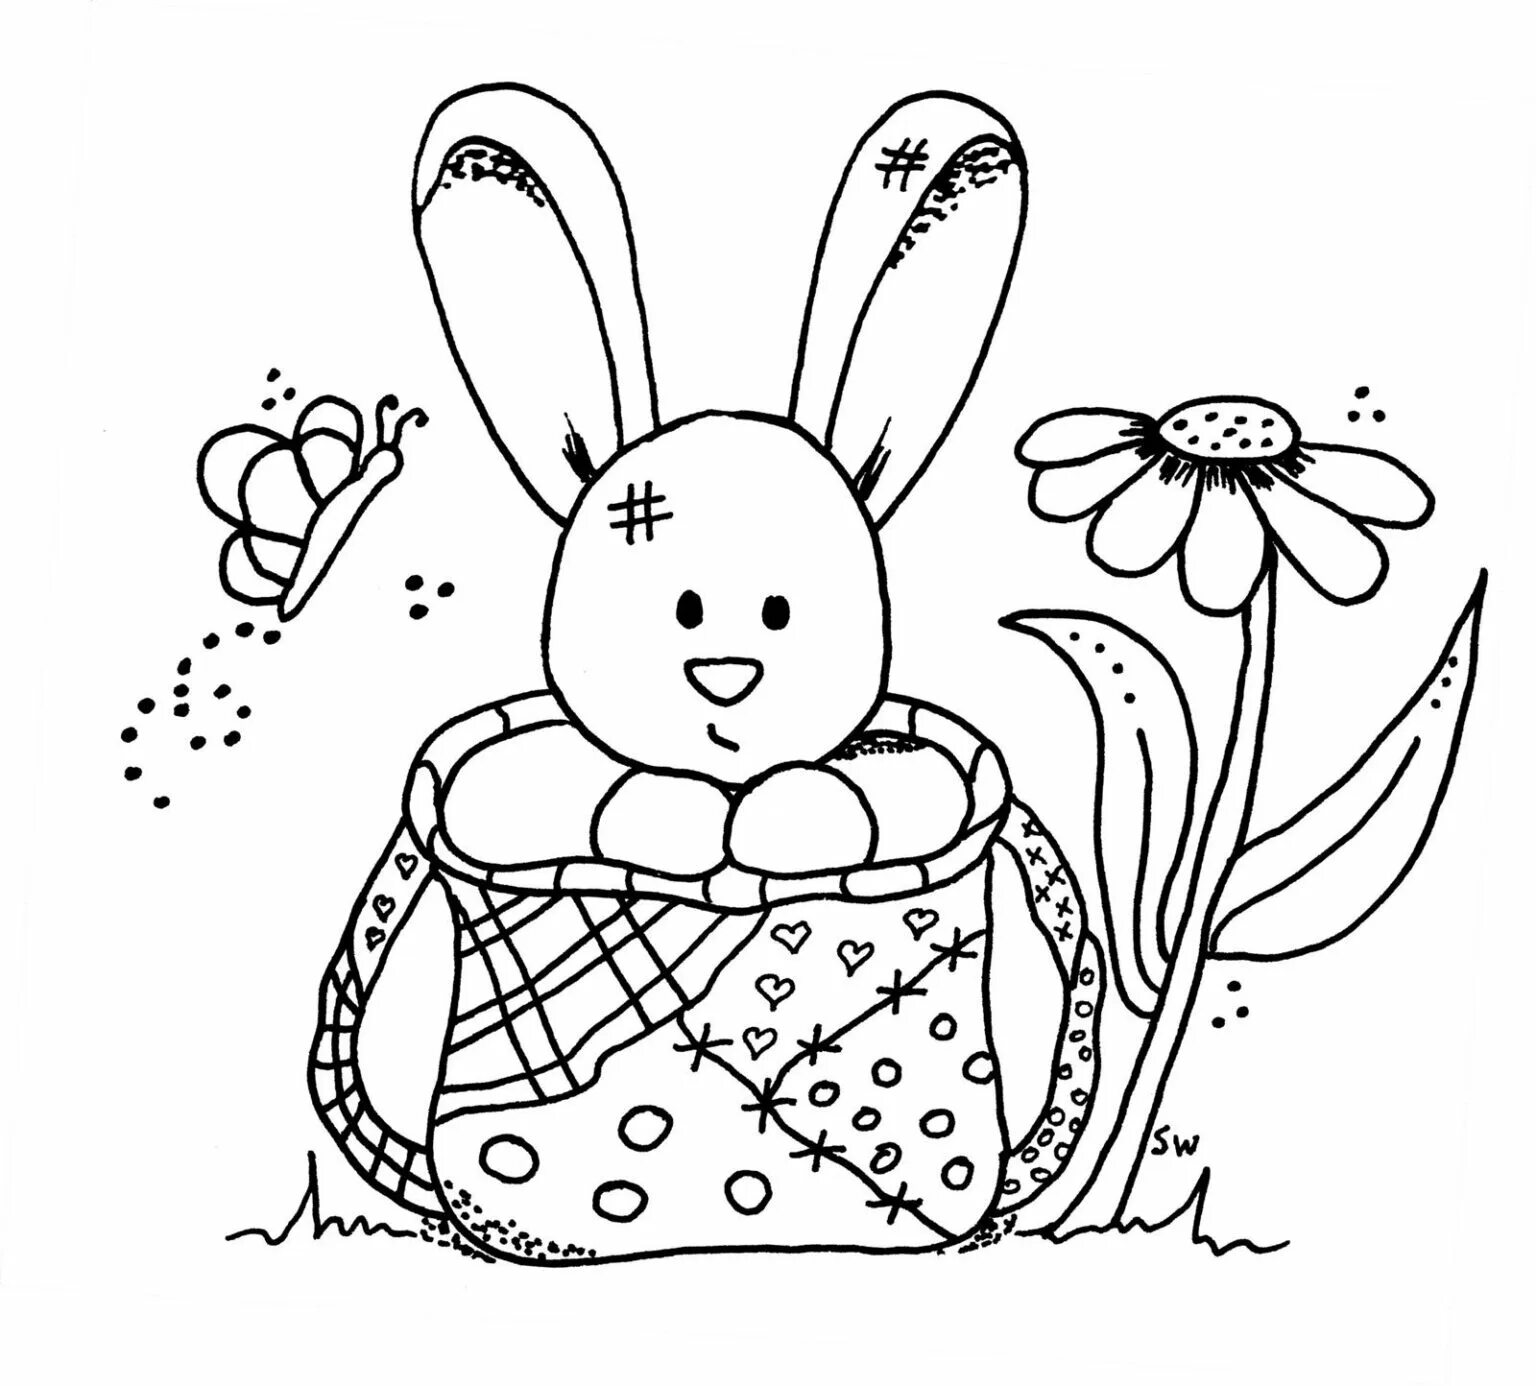 Happy new year bunny coloring page